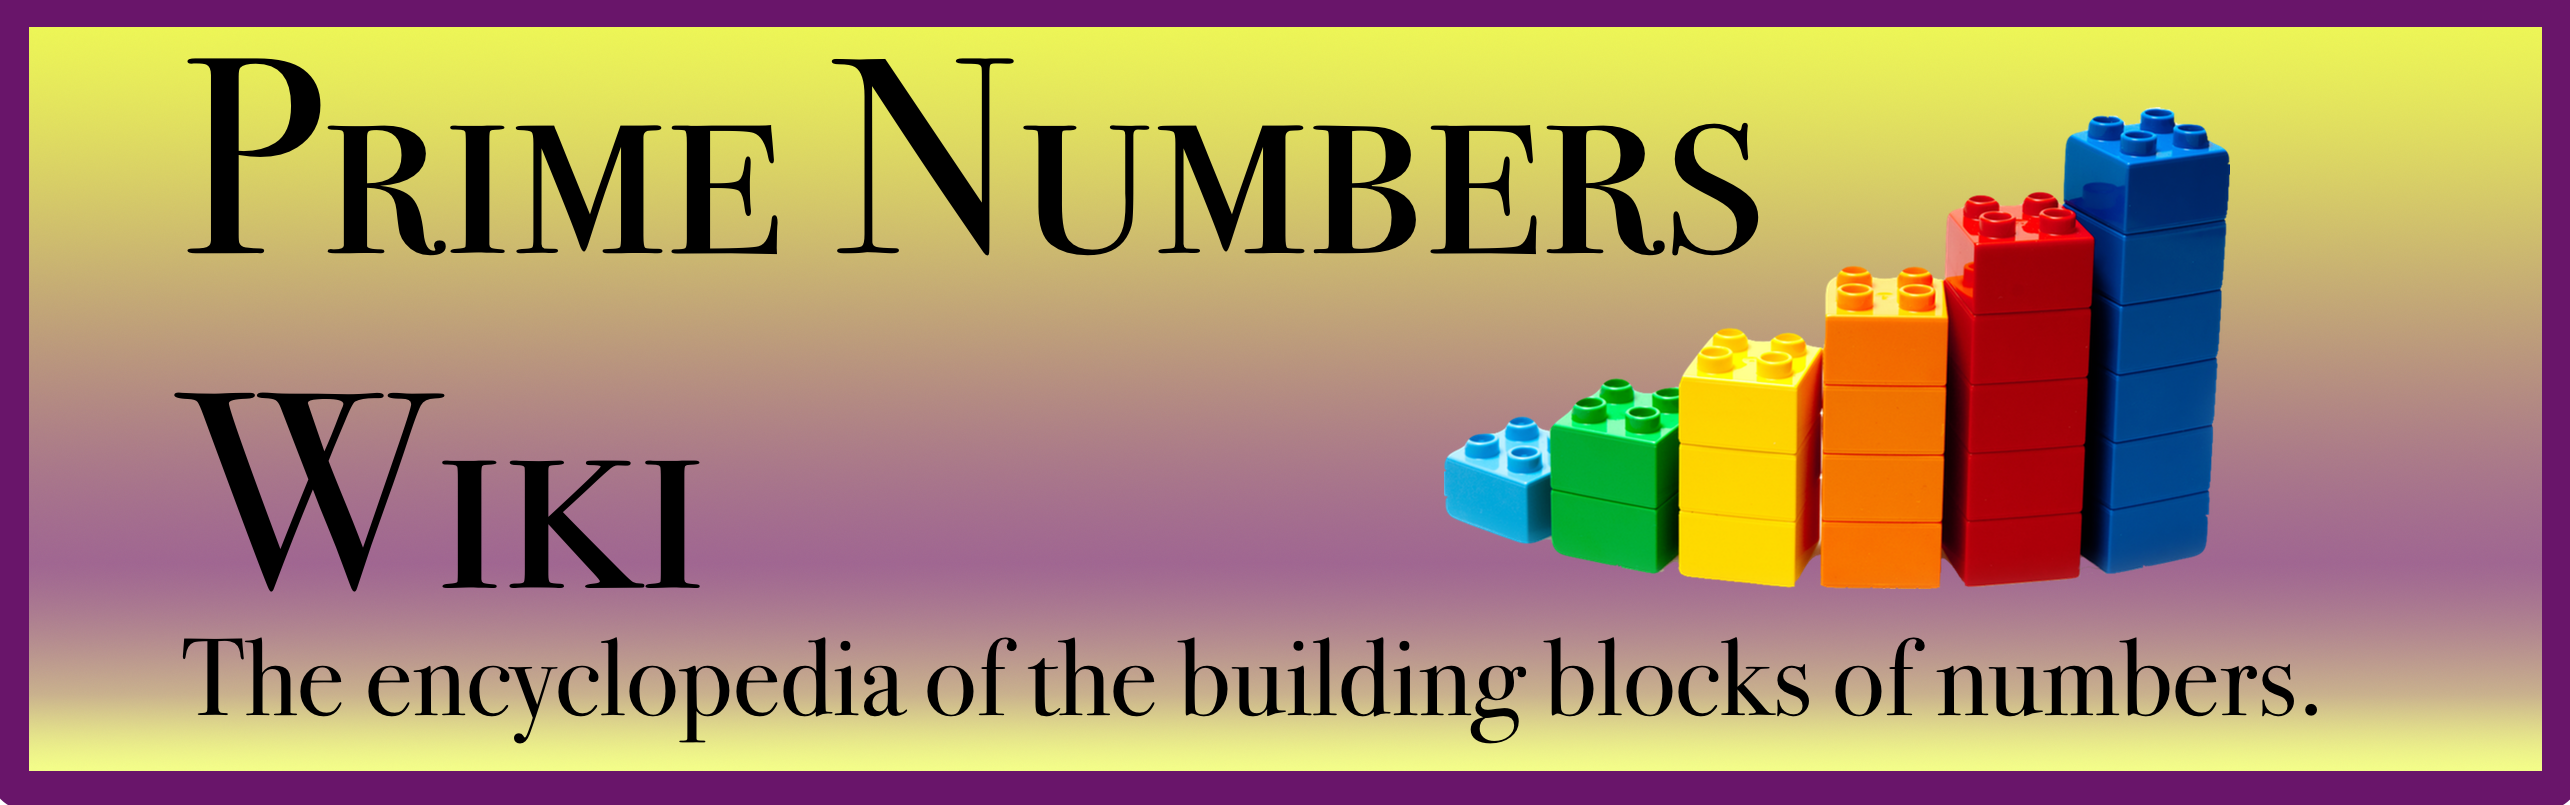 Prime number - Wikipedia